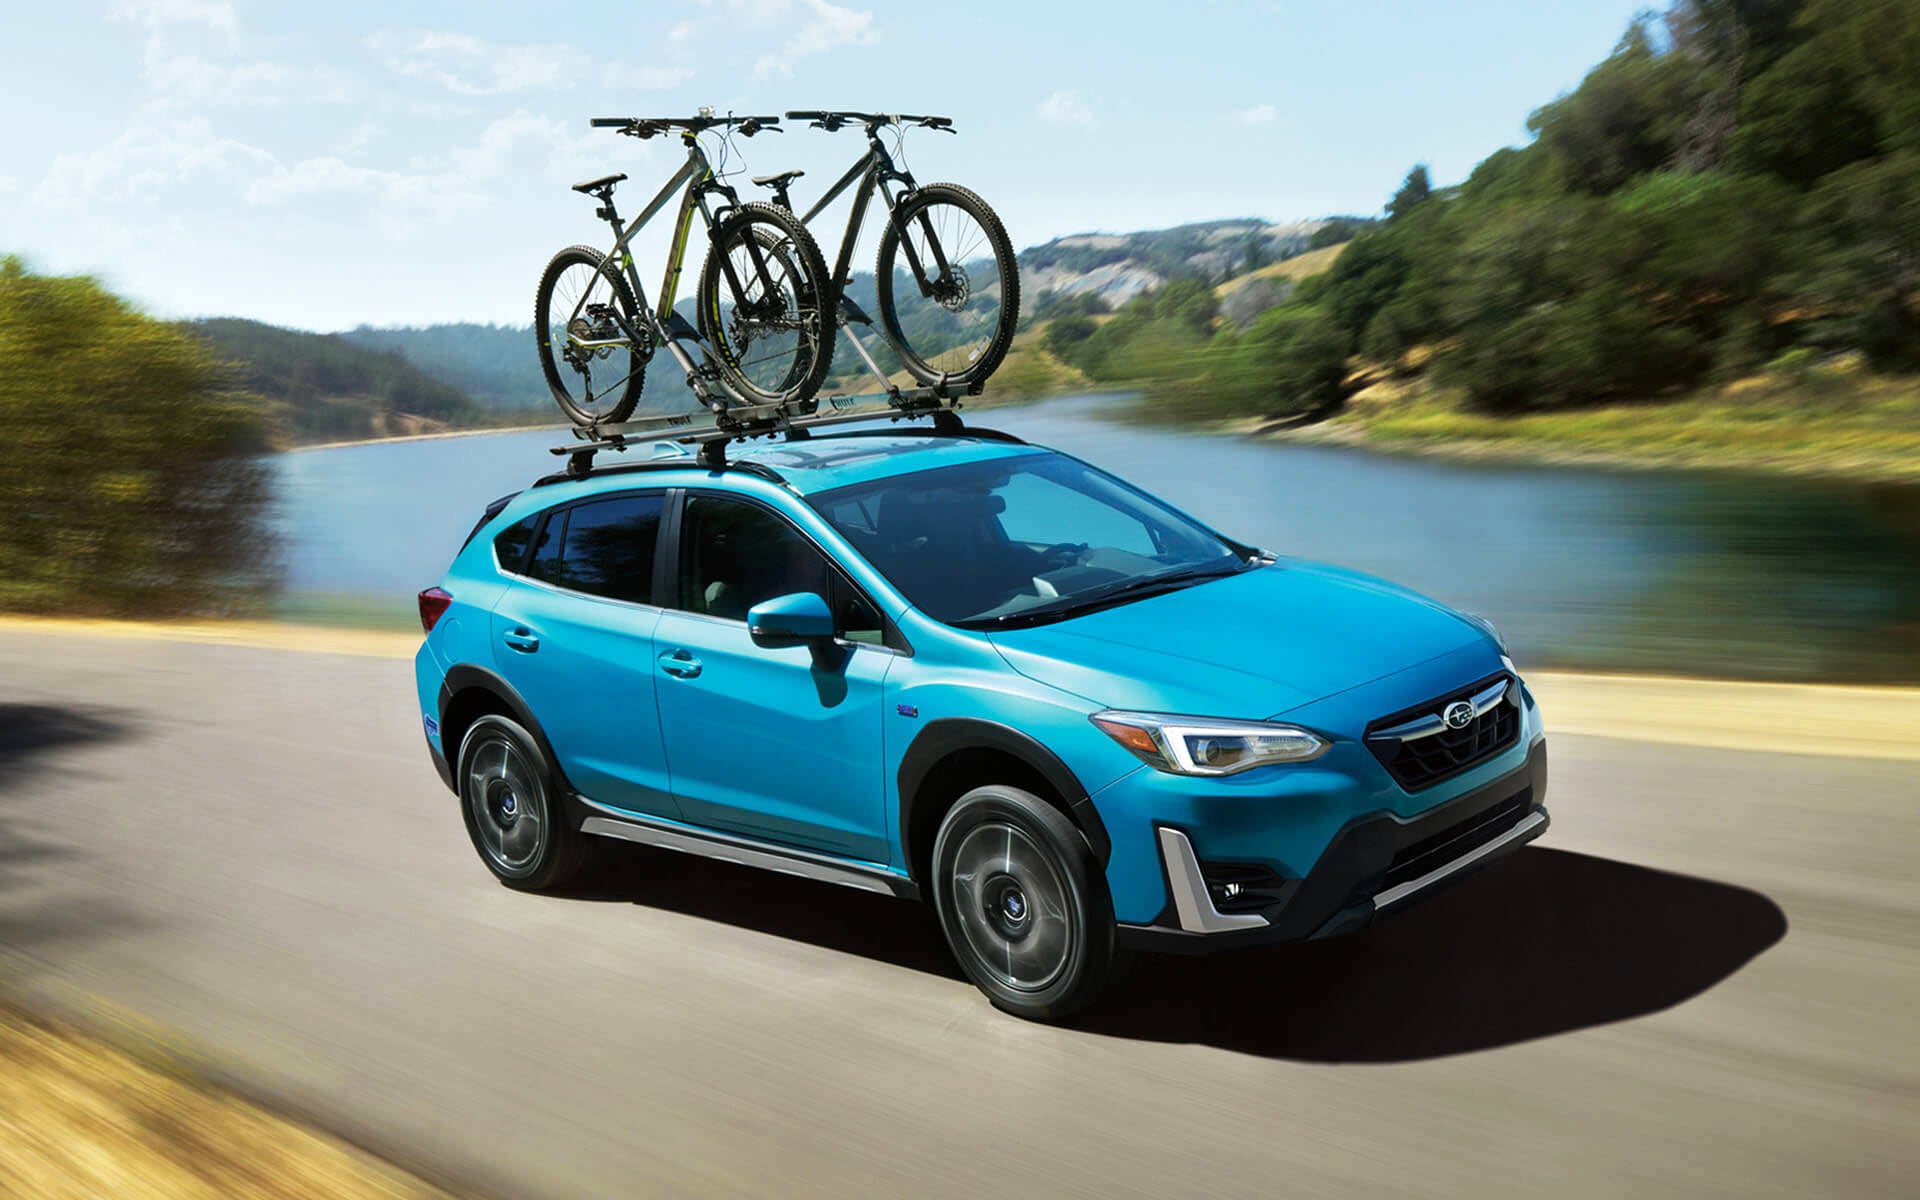 A blue Crosstrek Hybrid with two bicycles on its roof rack driving beside a river | Dutch Miller Subaru in Charleston WV